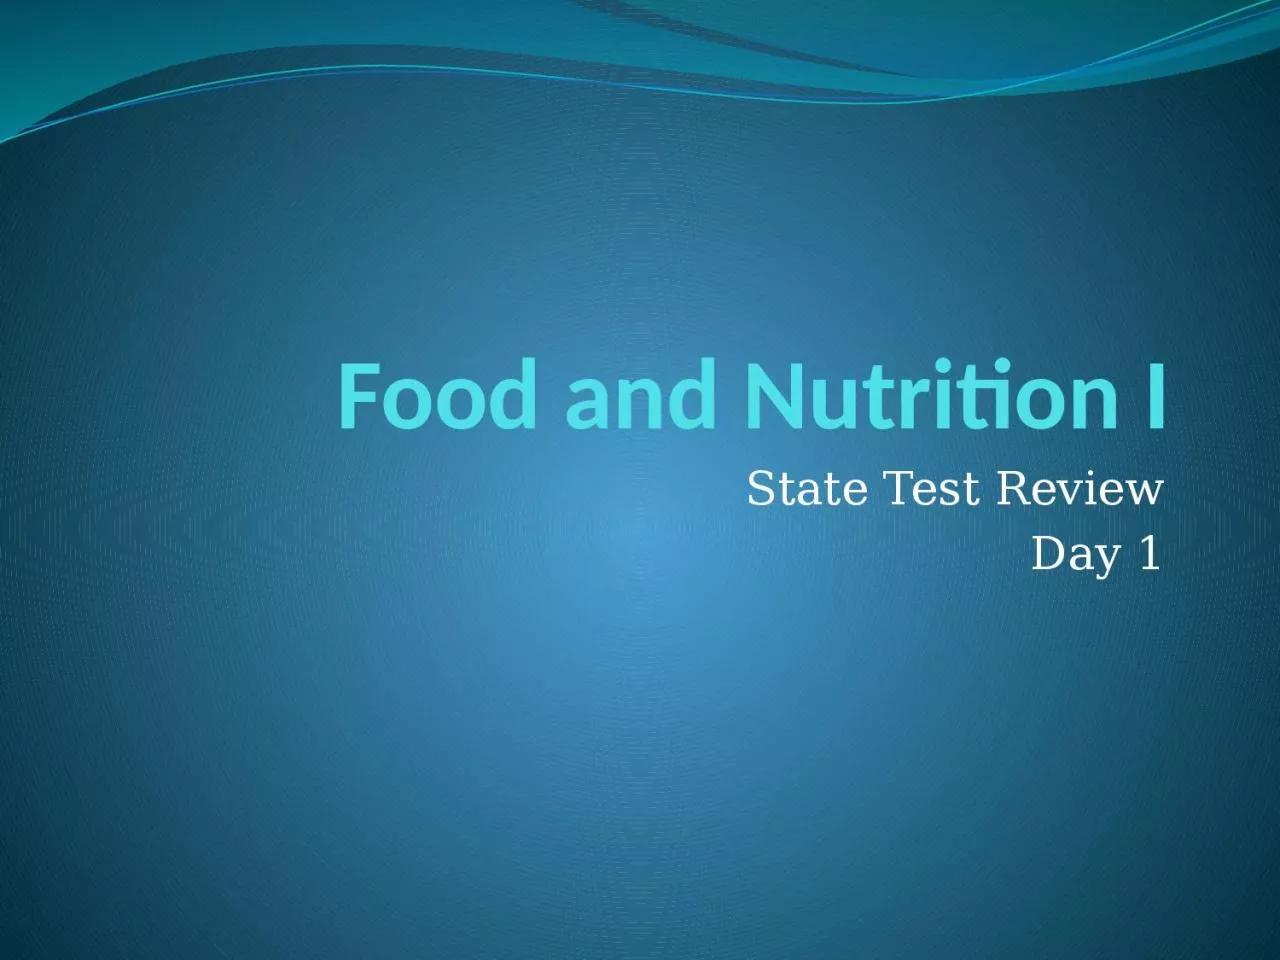 Food and Nutrition I State Test Review